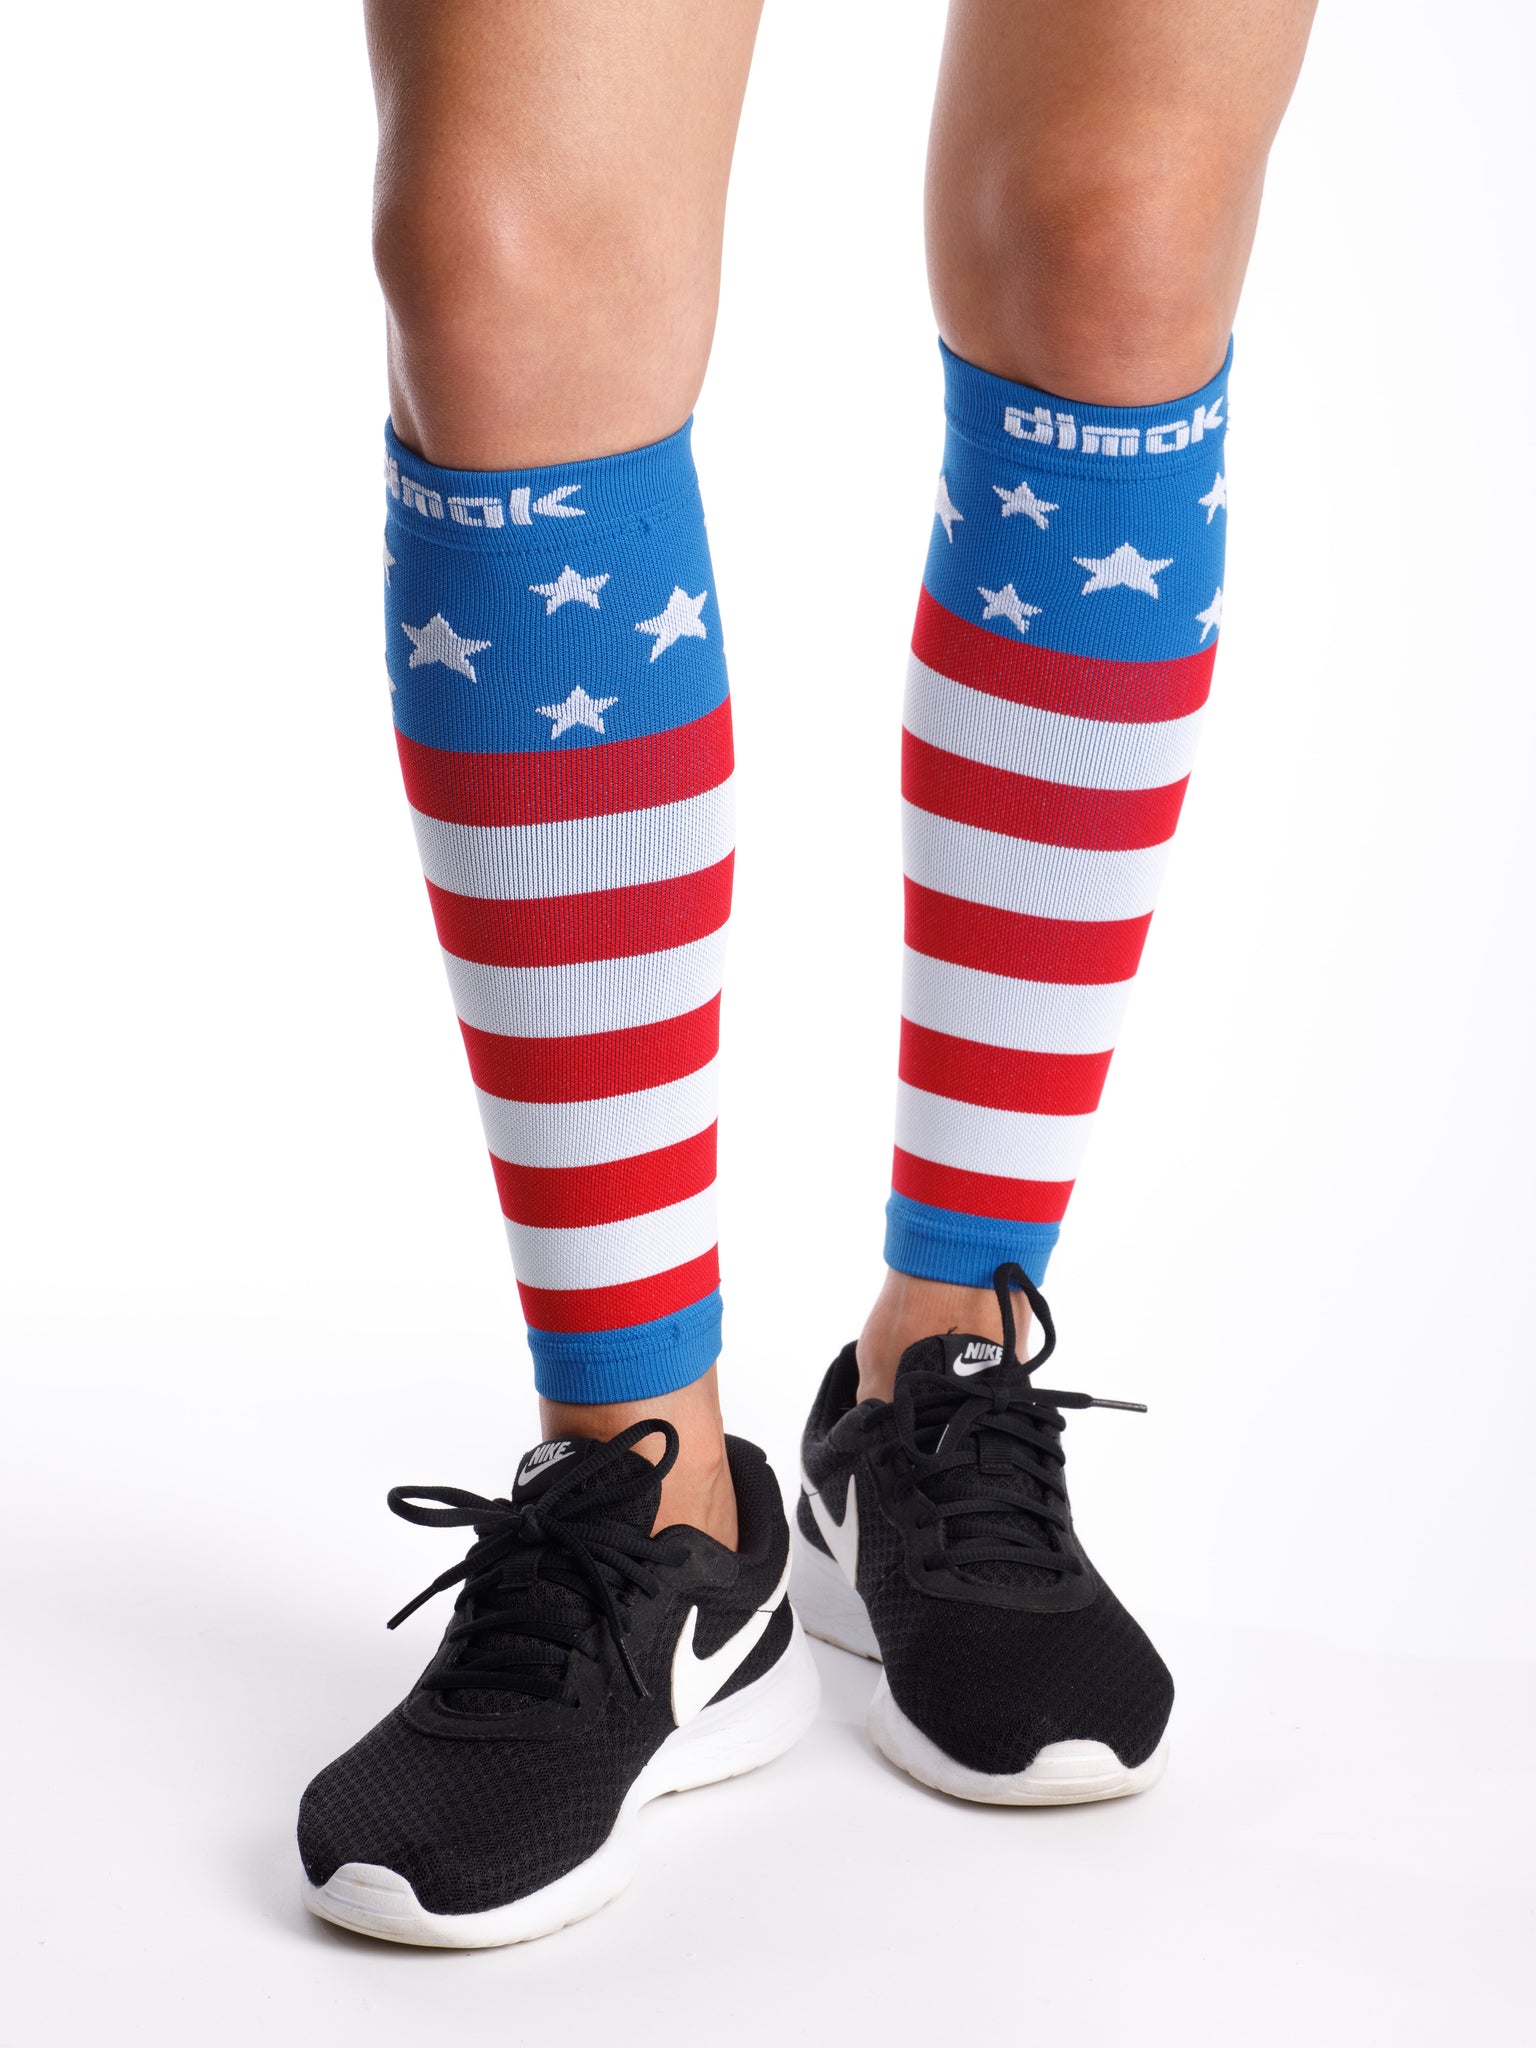 USA Flag Graduated Calf Compression Sleeves Calf Support Footless